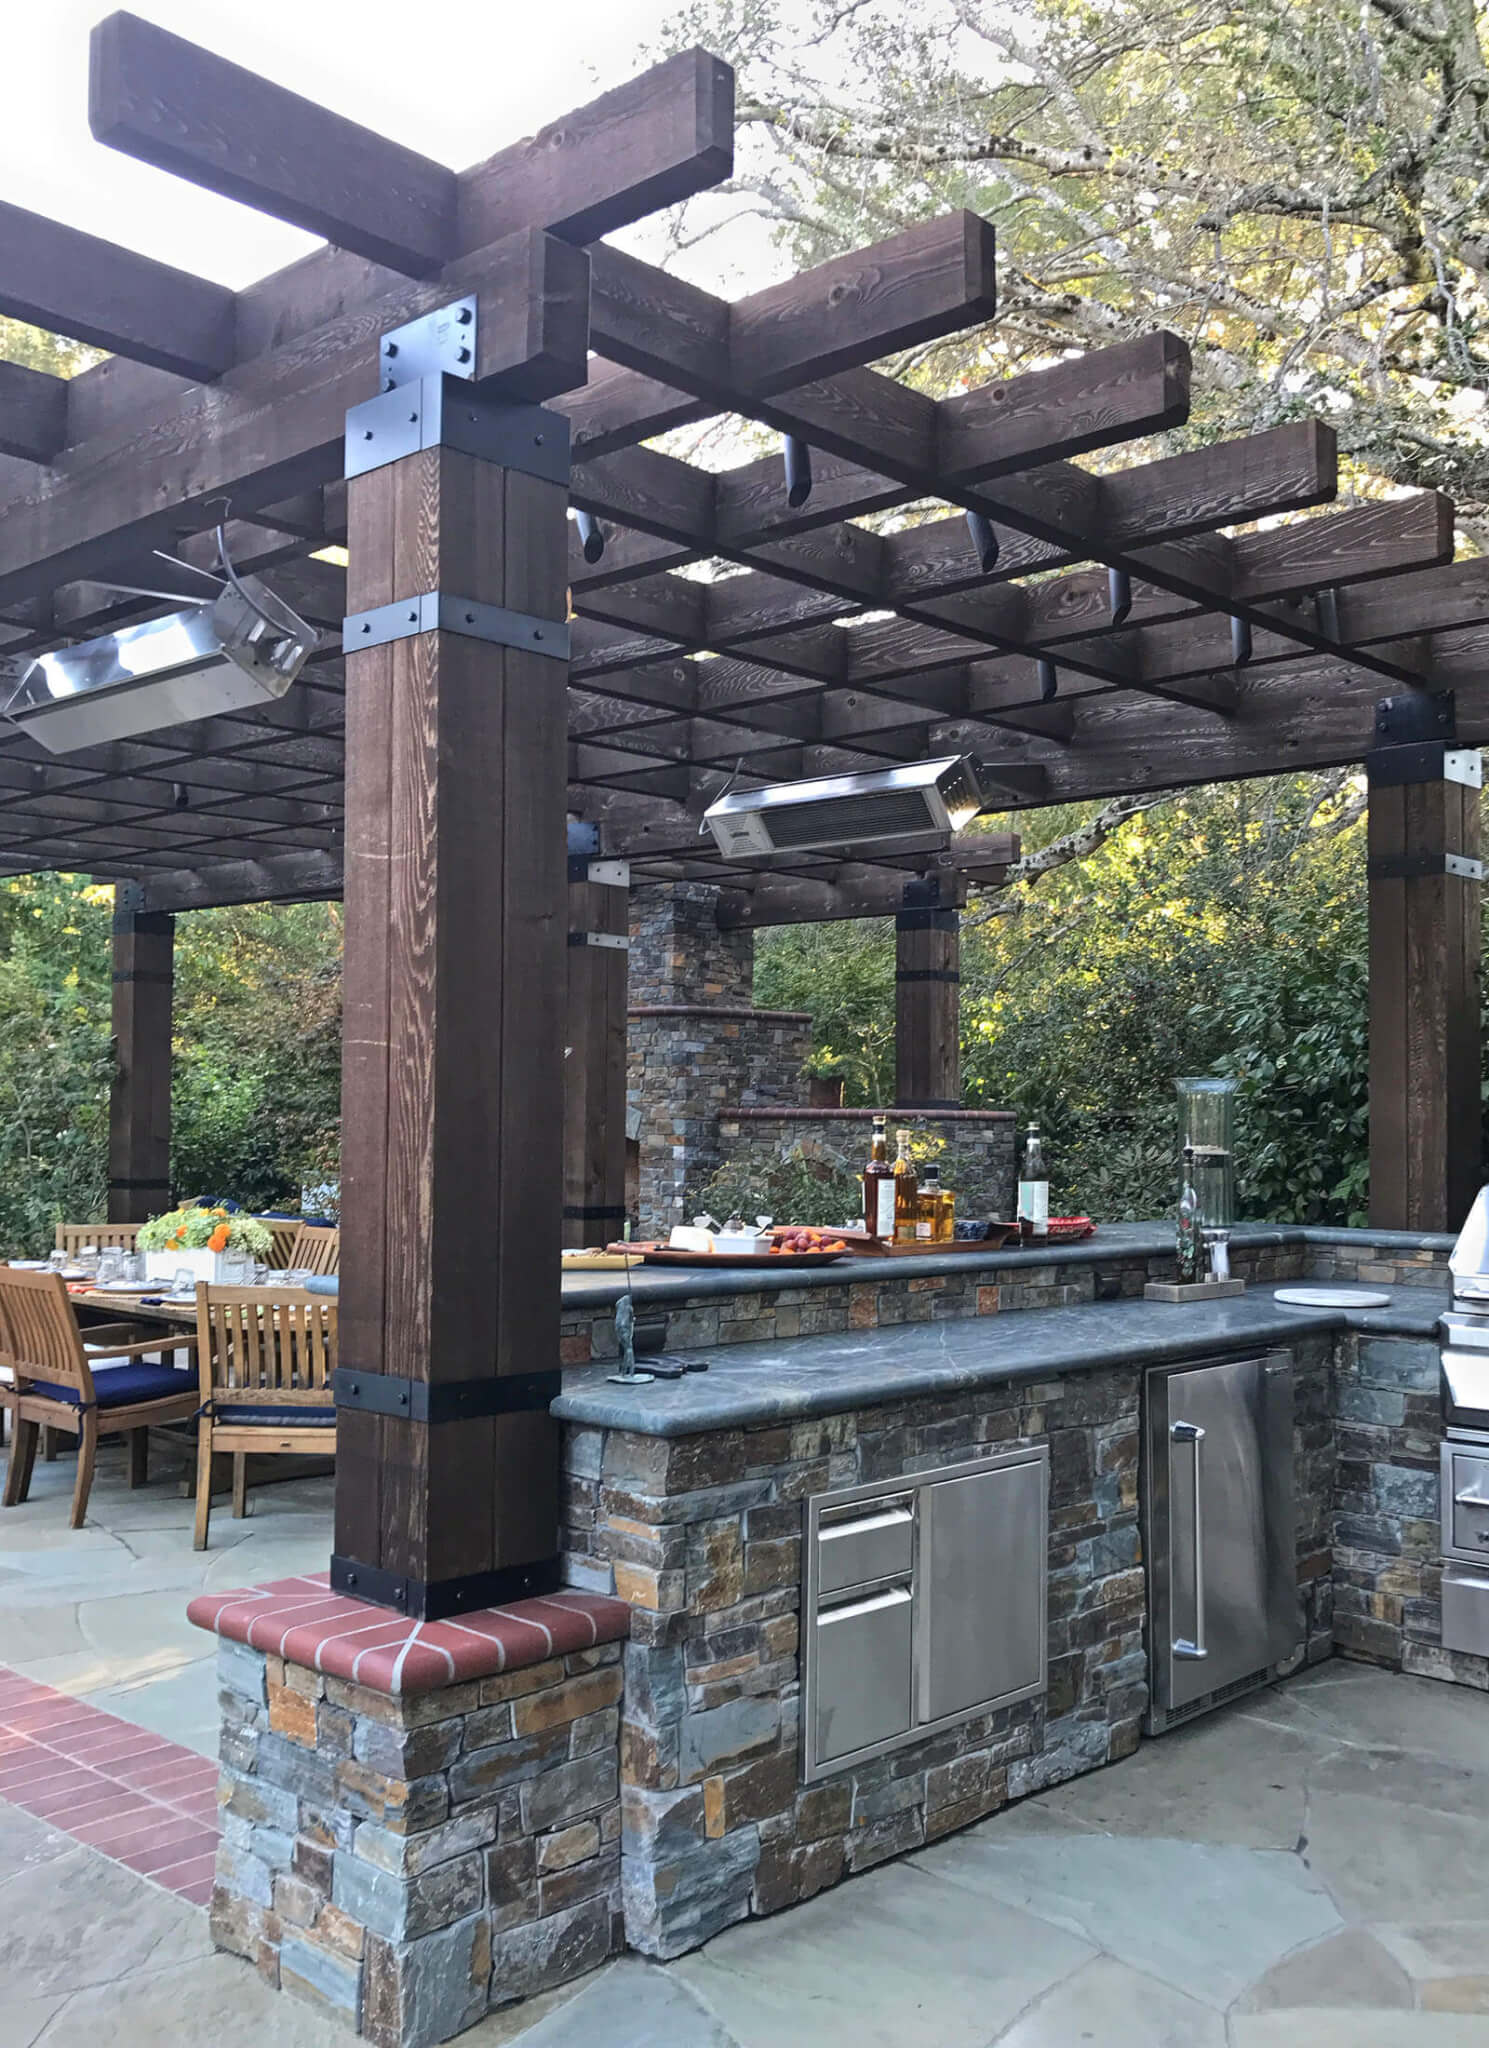 Rustic wood pergola with brick detailing shelters an outdoor dining area with stone fireplace and tiered stone outdoor kitchen and bar.